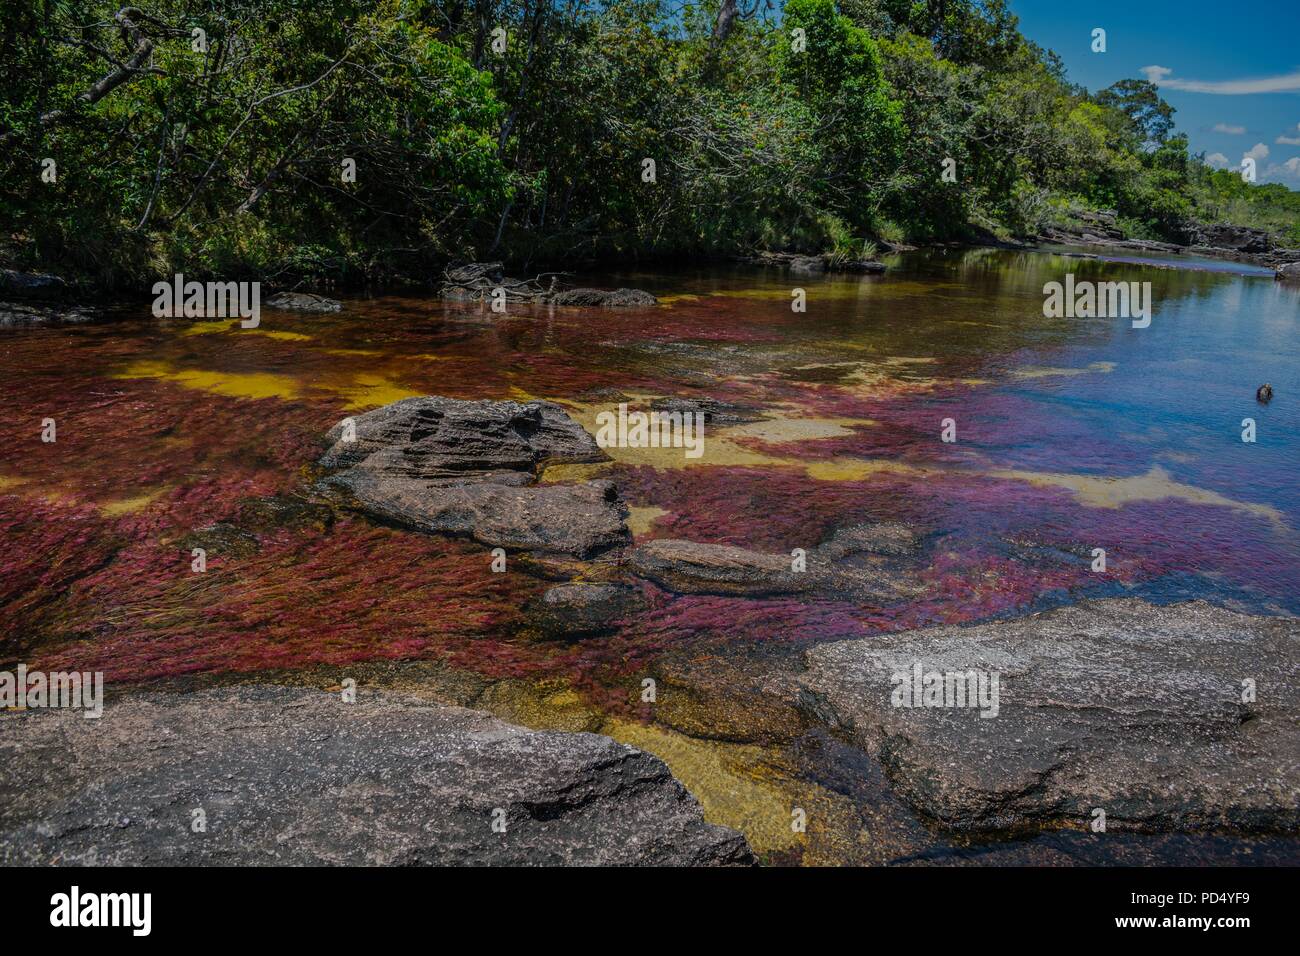 One of most beatiful rivers in the world. Caño Cristales, Colombia. Stock Photo